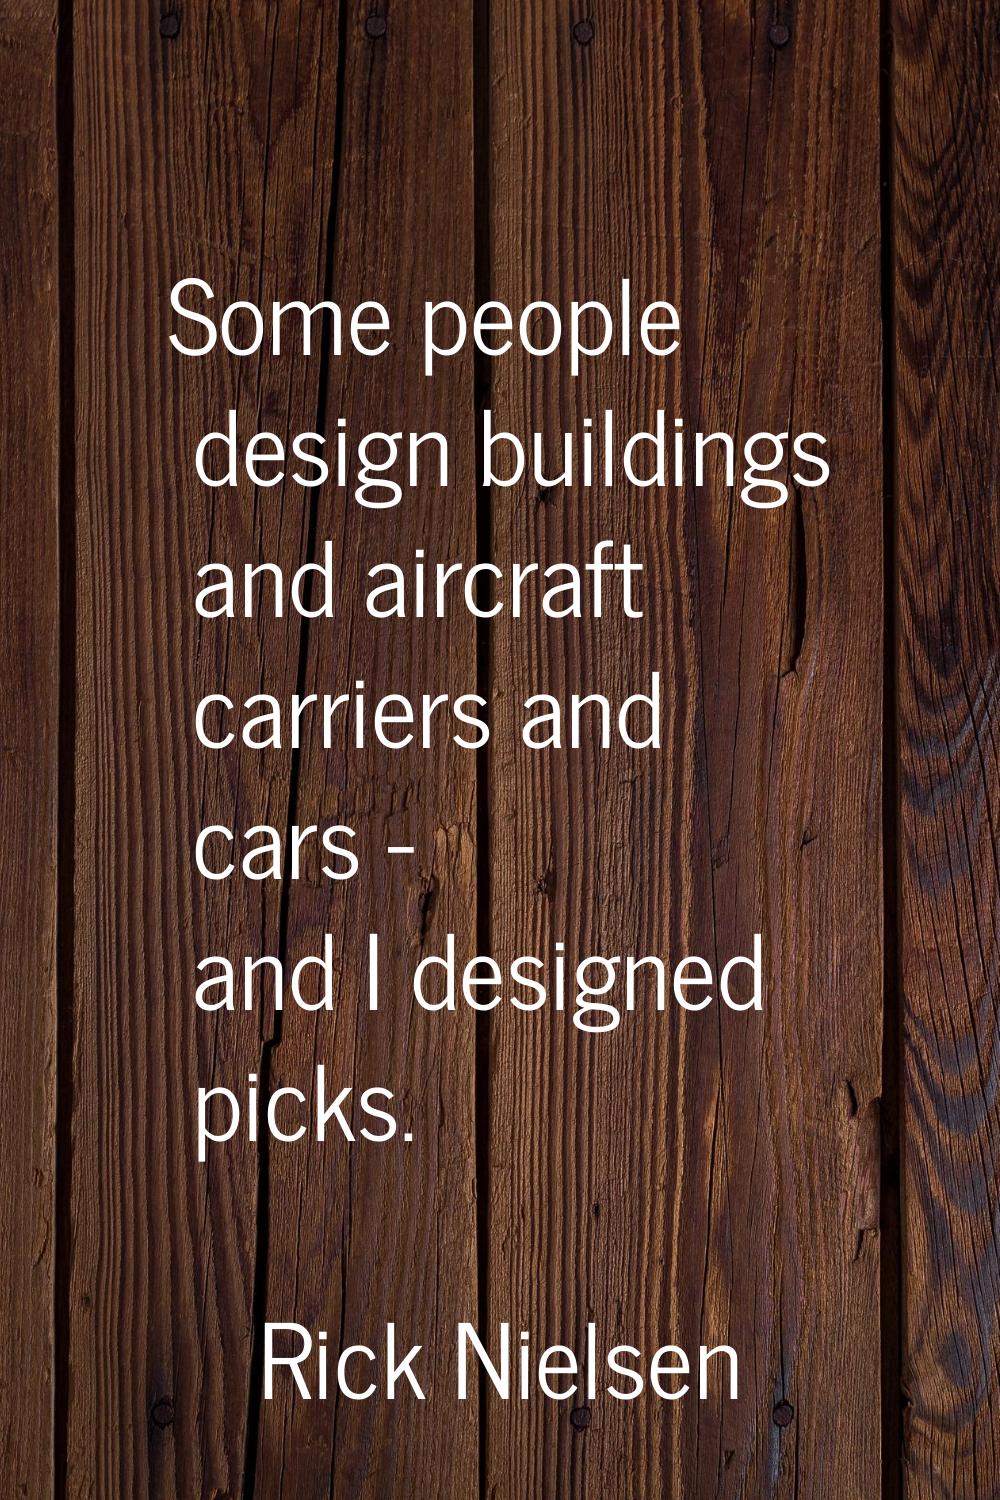 Some people design buildings and aircraft carriers and cars - and I designed picks.